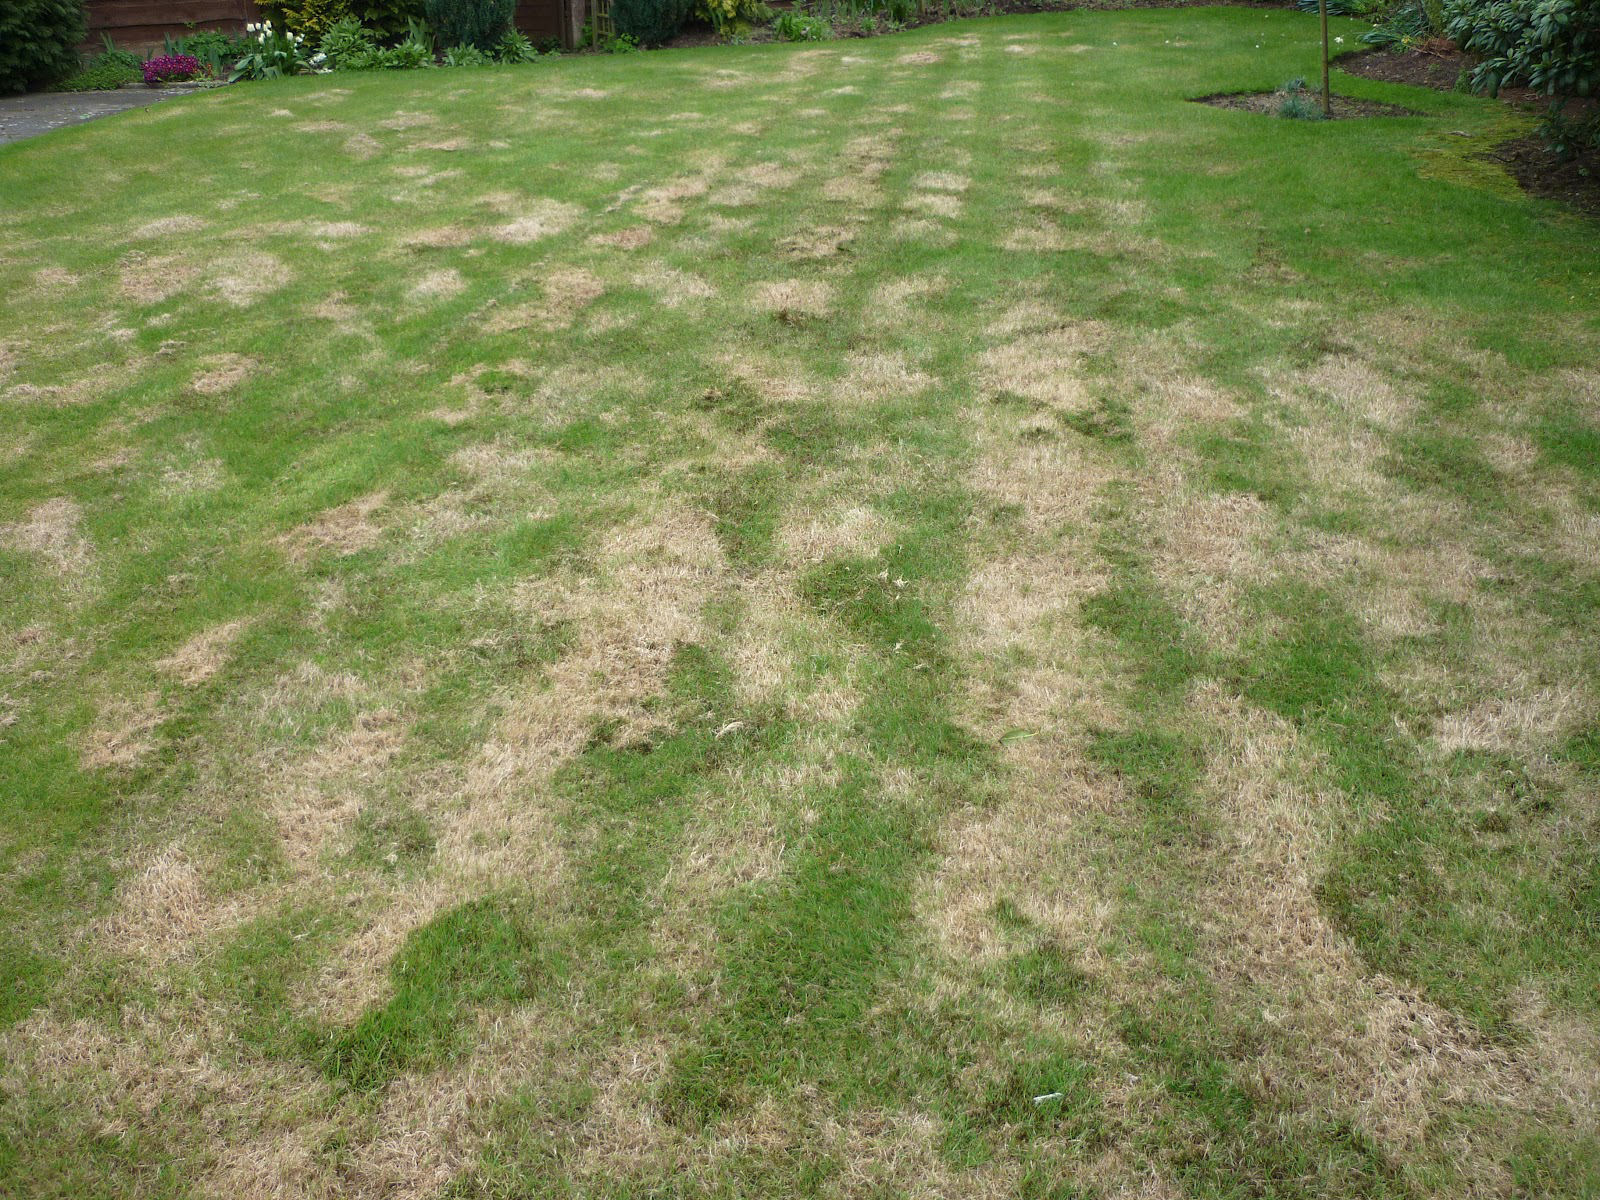 Expert tips on how to scarify a lawn